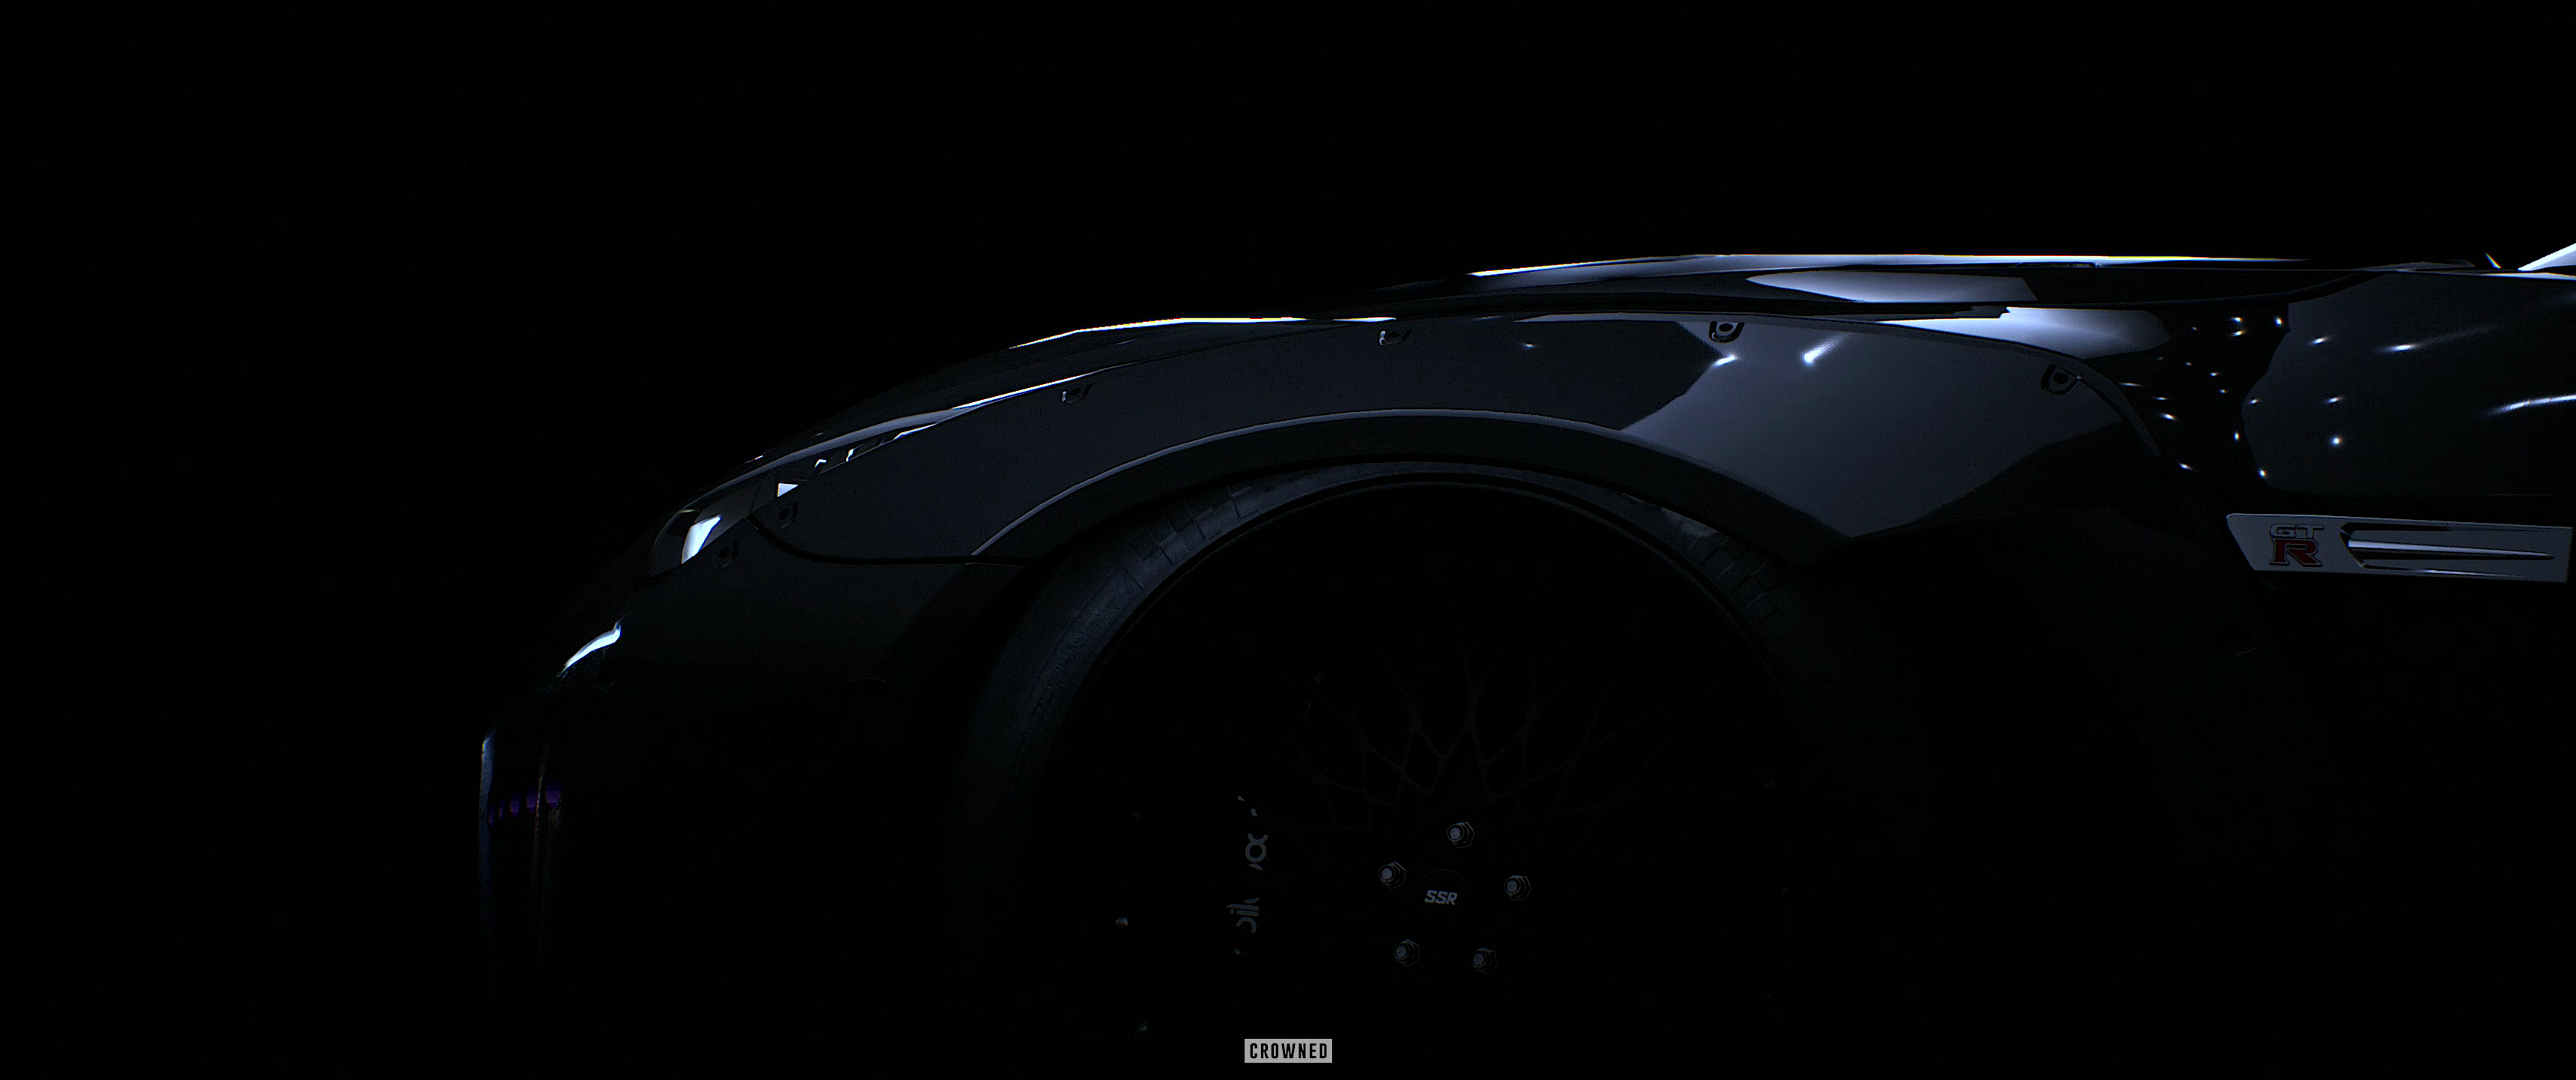 CROWNED Need For Speed Nissan GTR 3440x1442